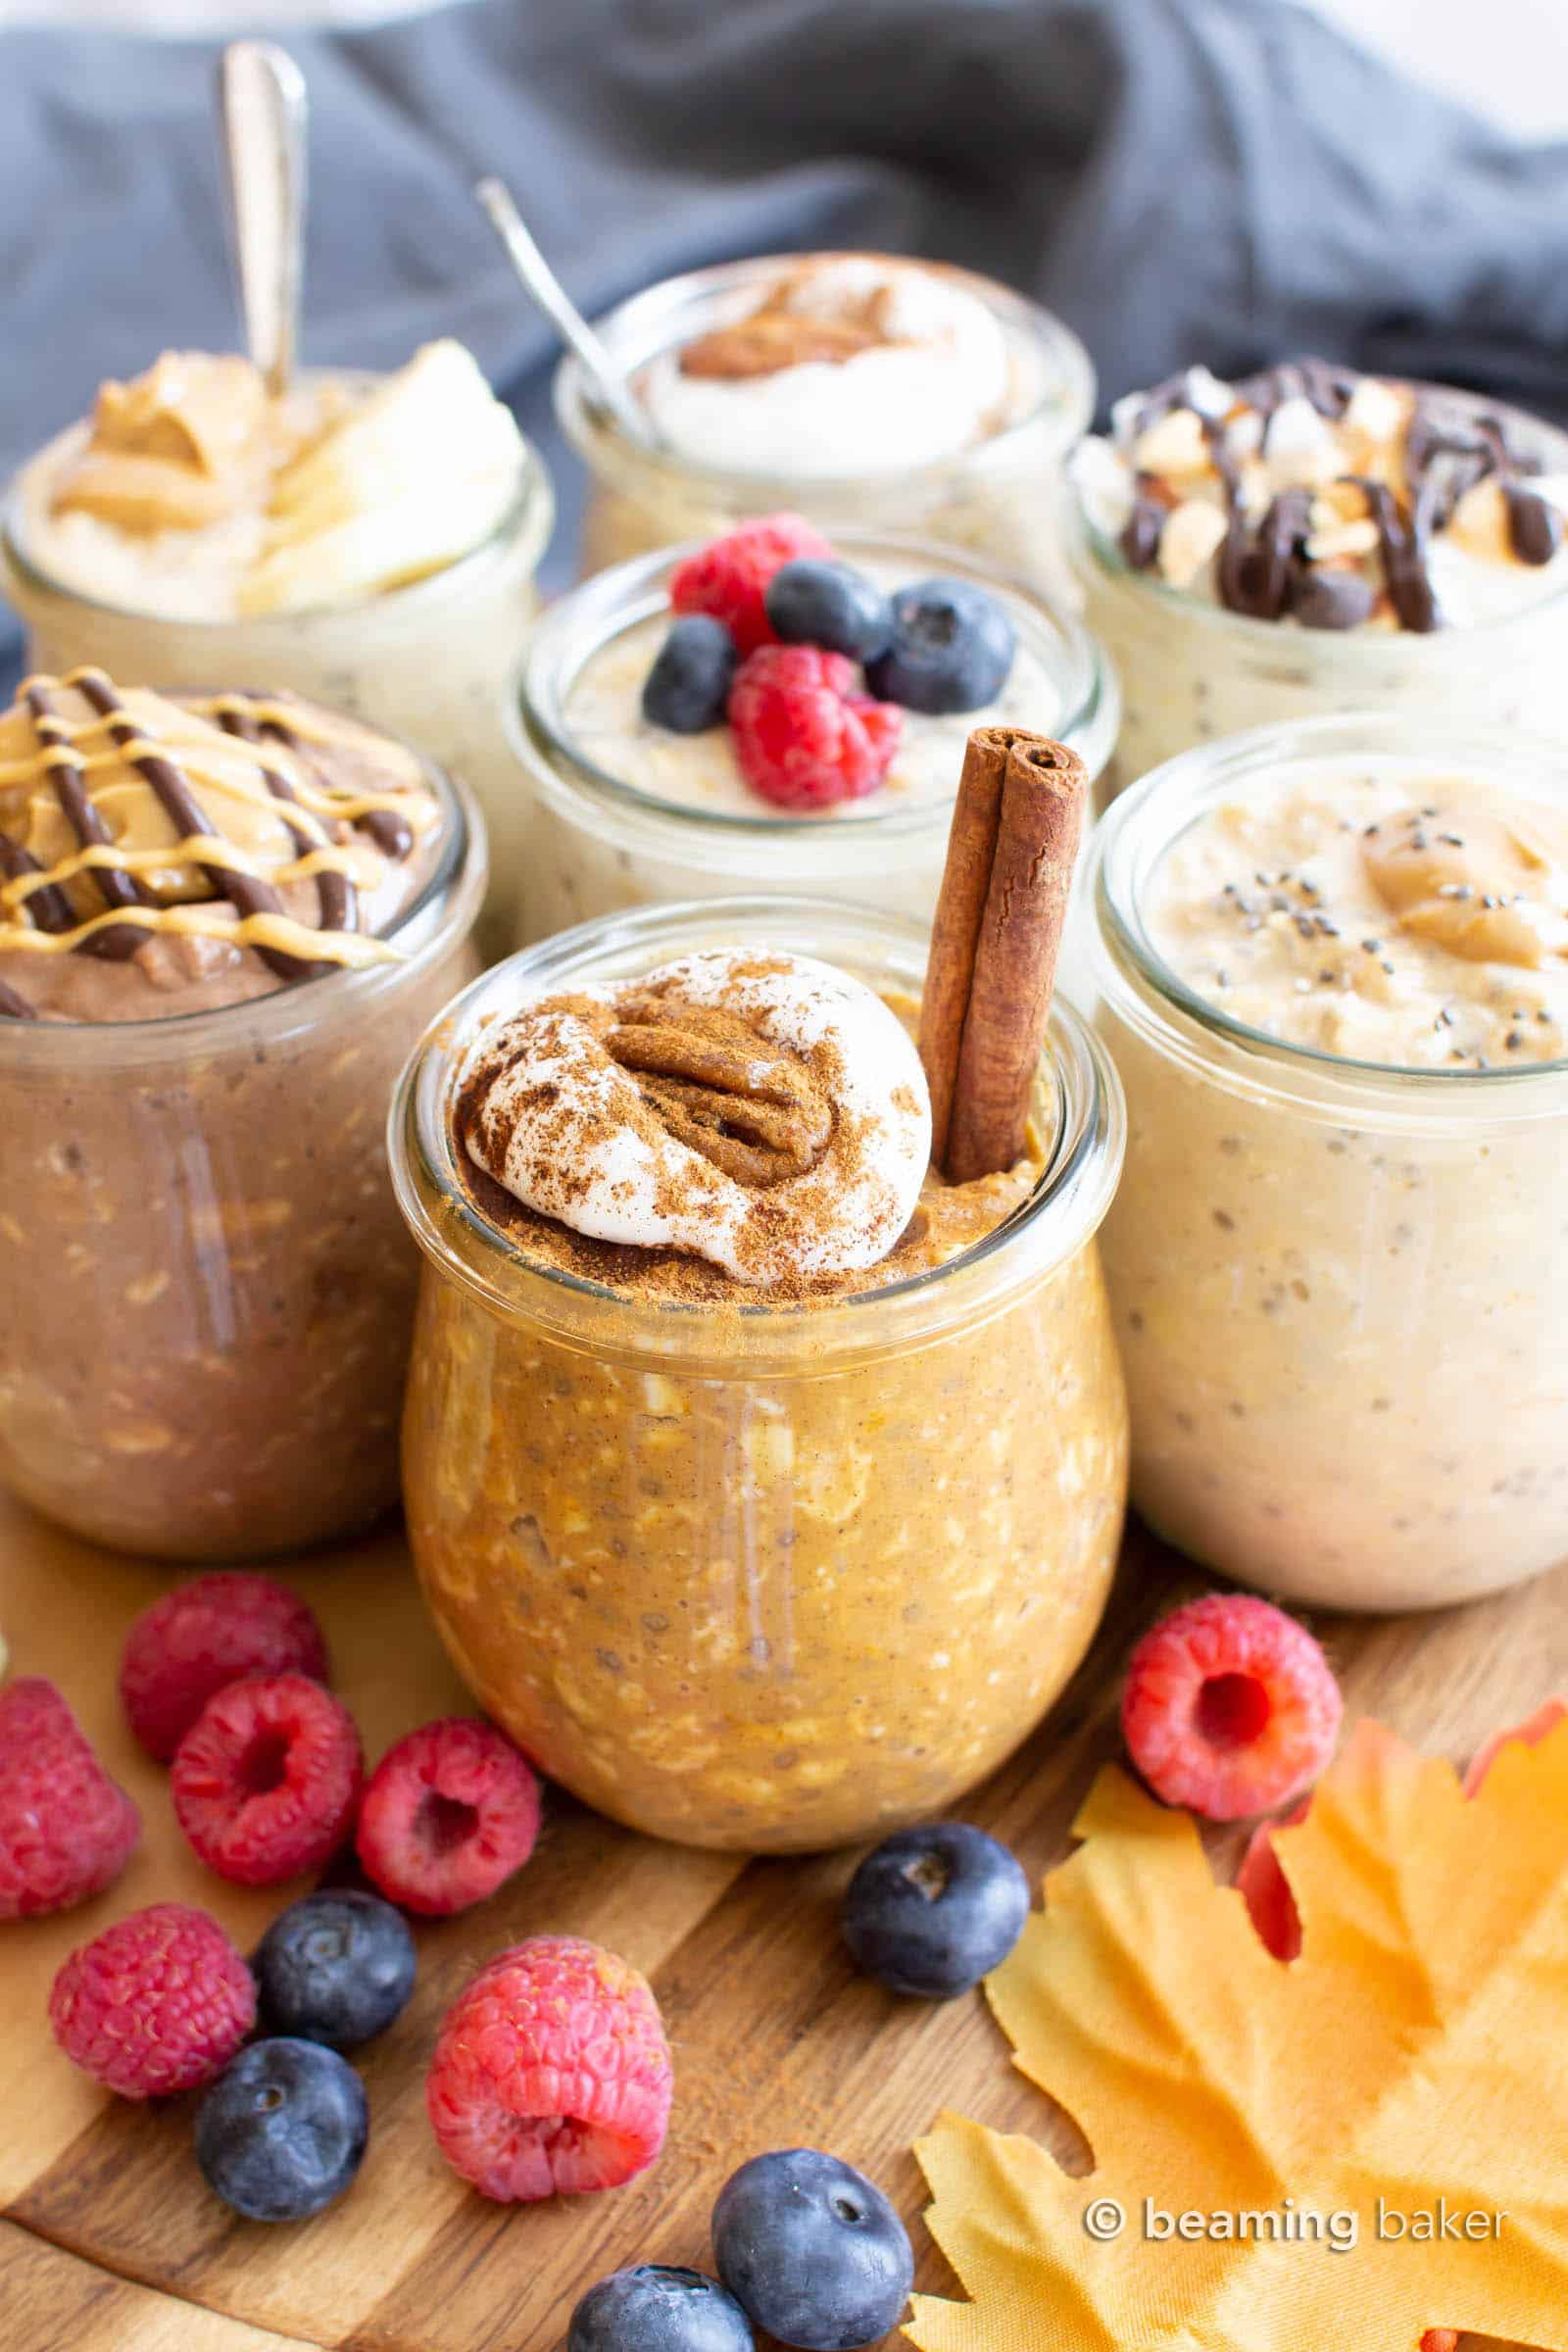 7 Ways: Easy Vegan Overnight Oats (Healthy): check out my 7 favorite ways to make Vegan overnight oats! Make deliciously creamy & satisfying overnight oats in minutes for a quick & easy breakfast! #Overnight Oats #Vegan #Healthy #Breakfast | Recipe at BeamingBaker.com